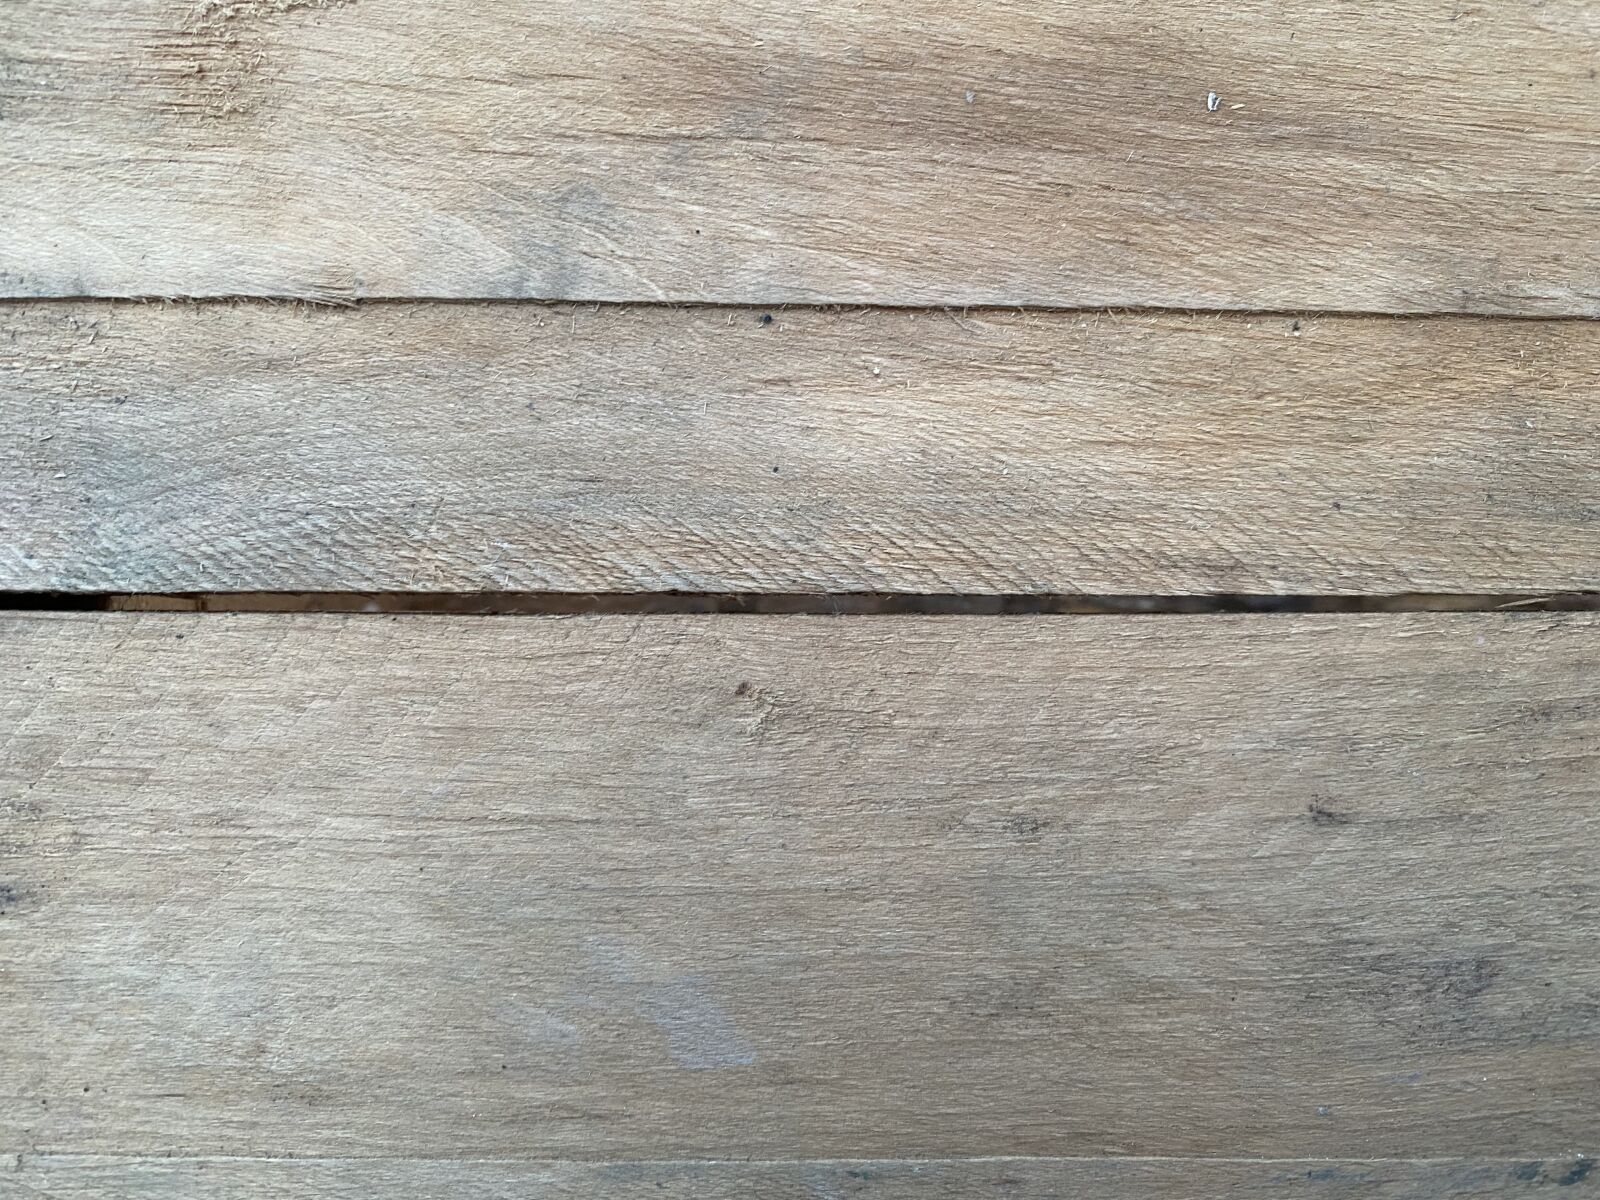 Apple iPhone 11 Pro Max sample photo. Material, wood, surface photography